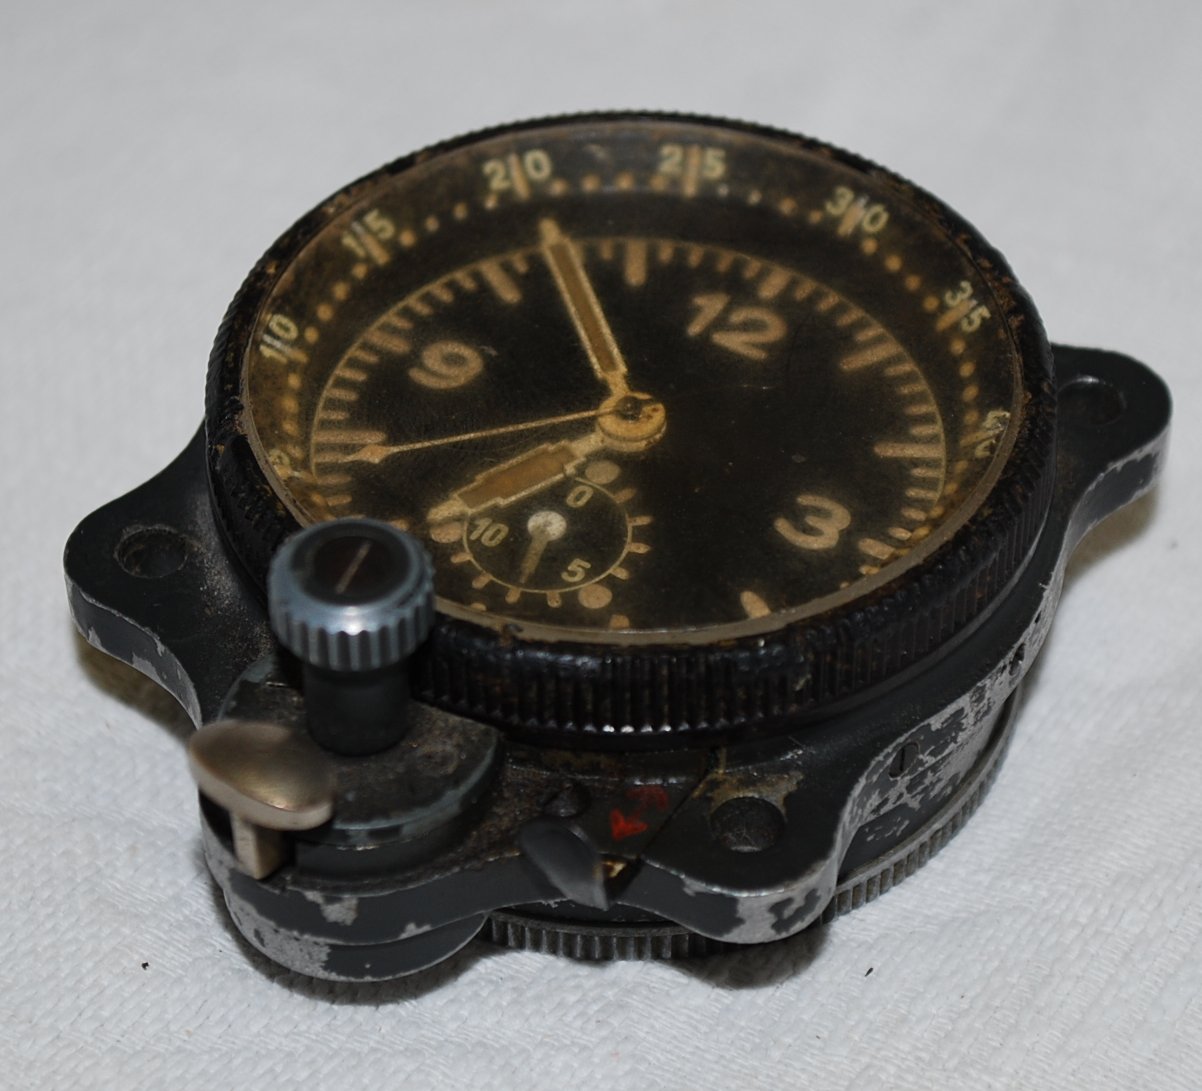 A German WWII Luftwaffe navigators clock with stop watch and time elapsed facilities. Alloy case